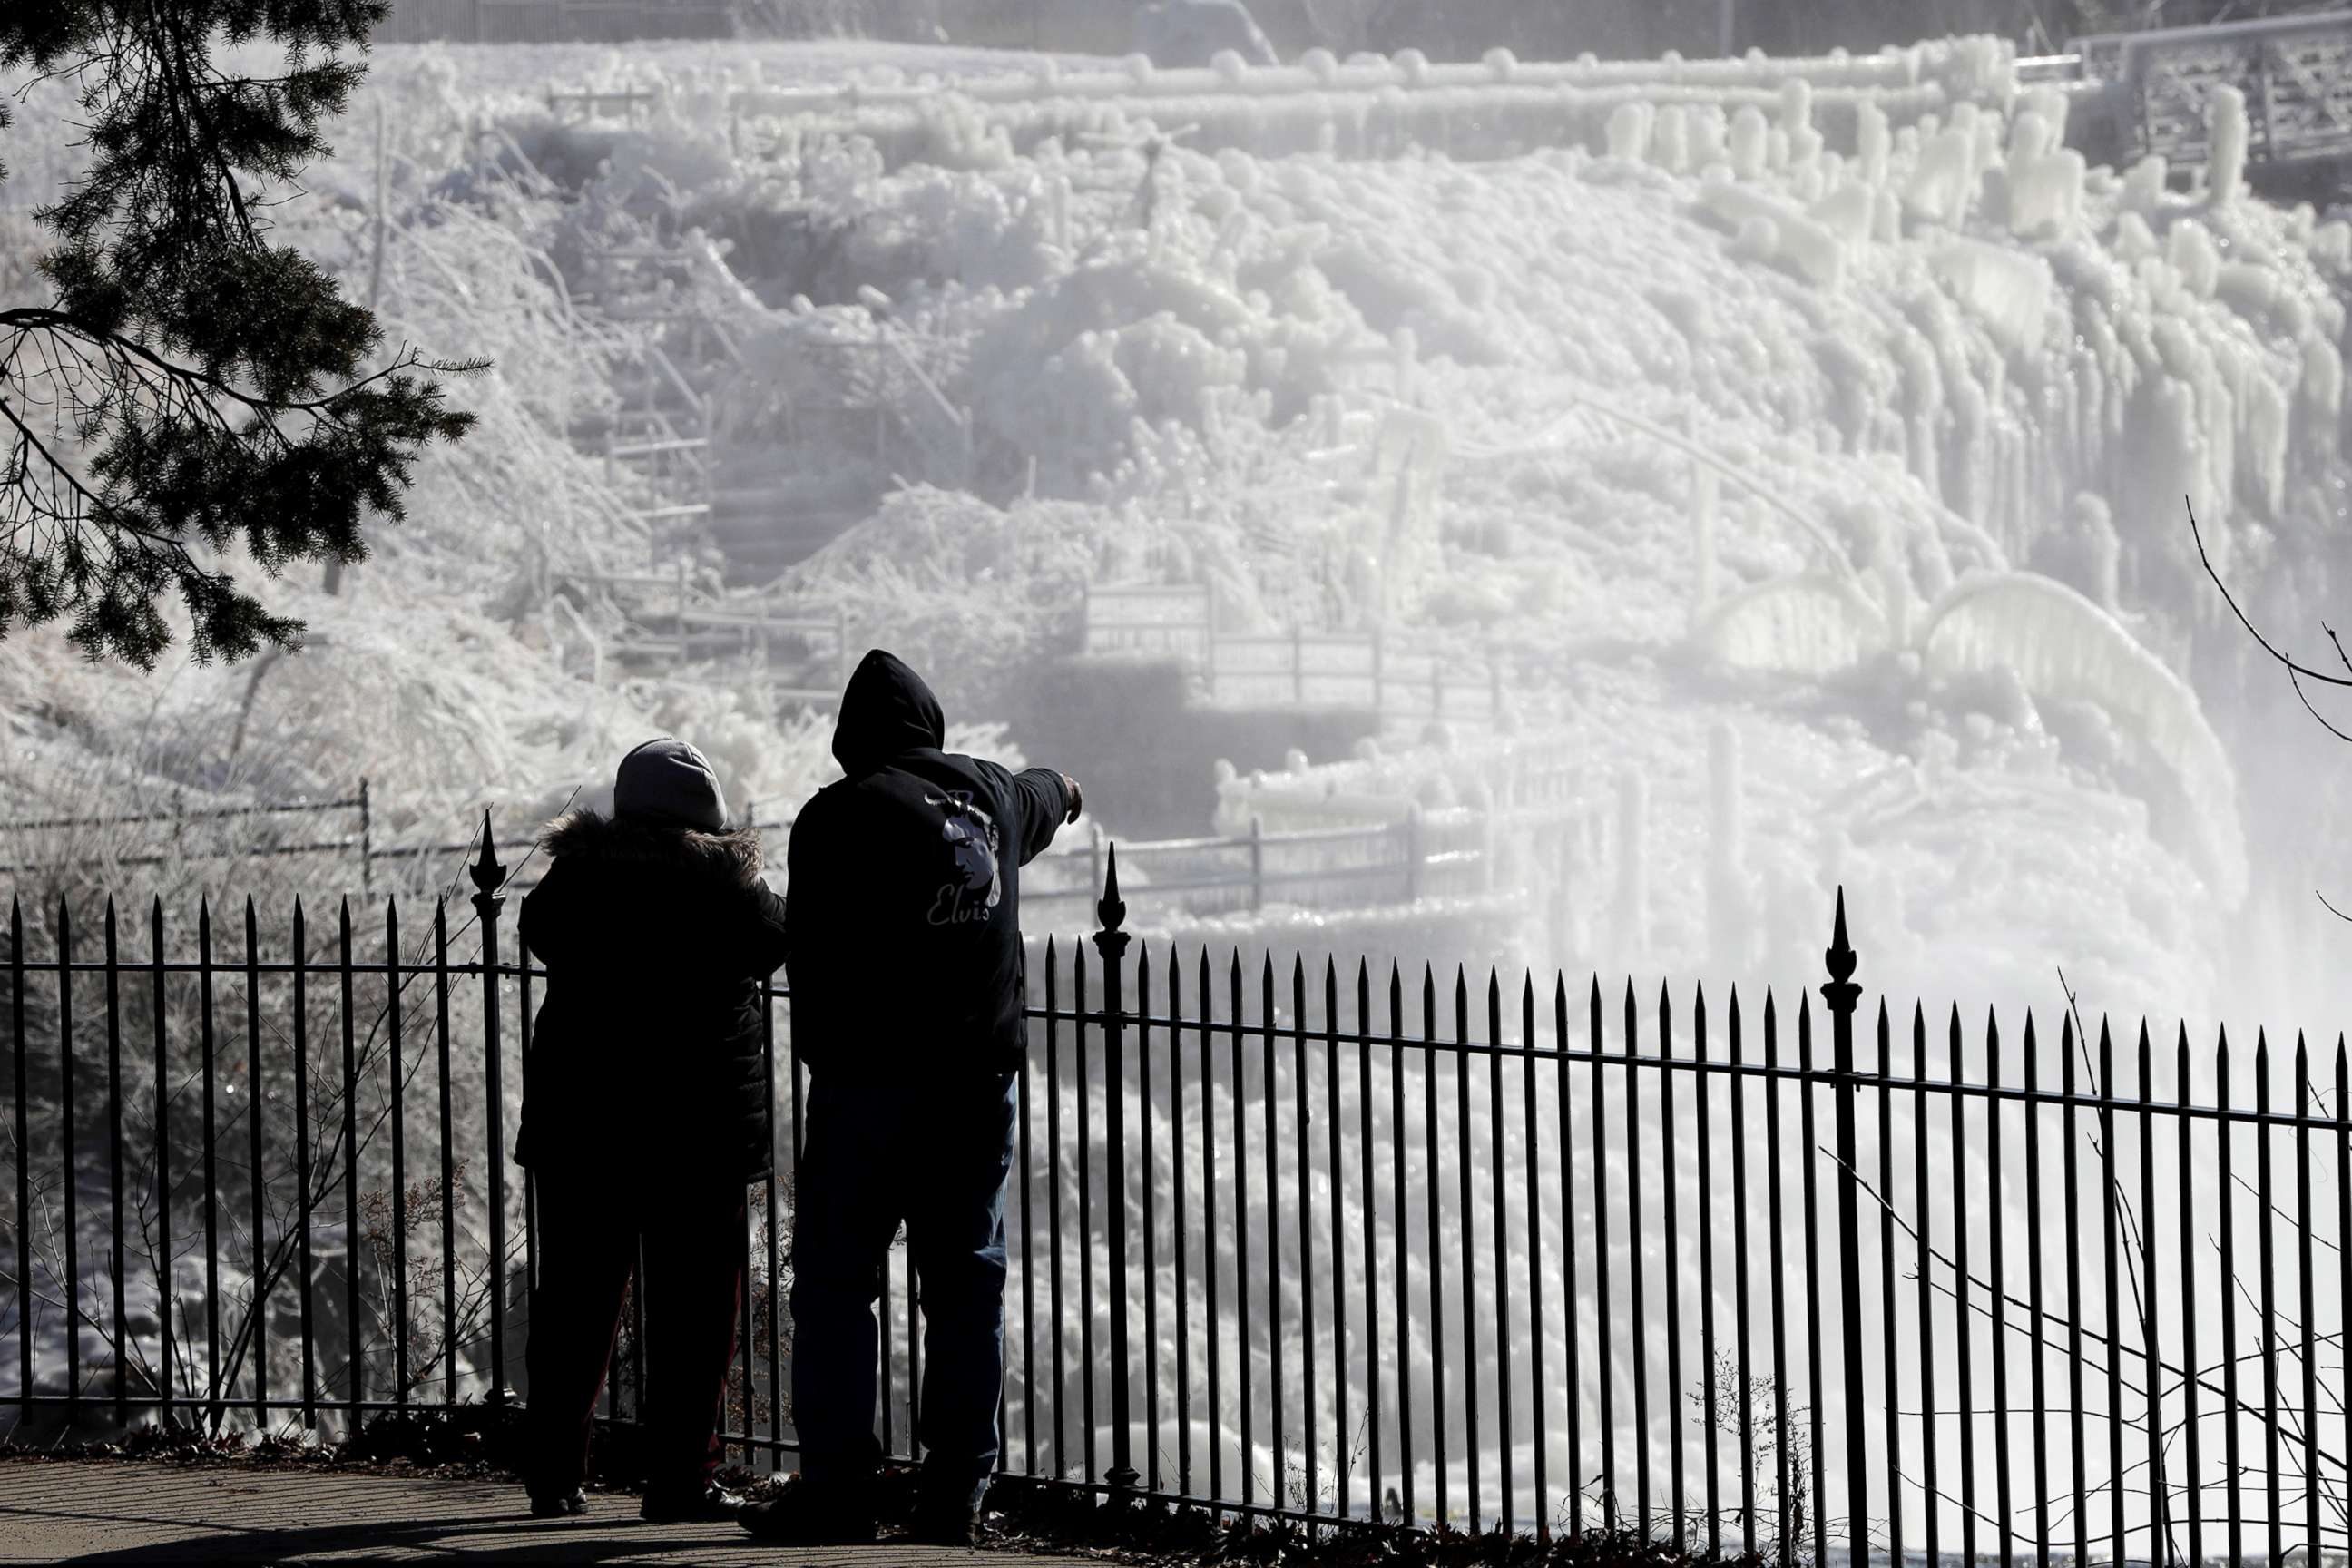 PHOTO: Ice is seen on the side of the Great Falls National Historic Park as a couple takes in the sights during a frigid winter day, Jan. 30, 2019, in Paterson, N.J.